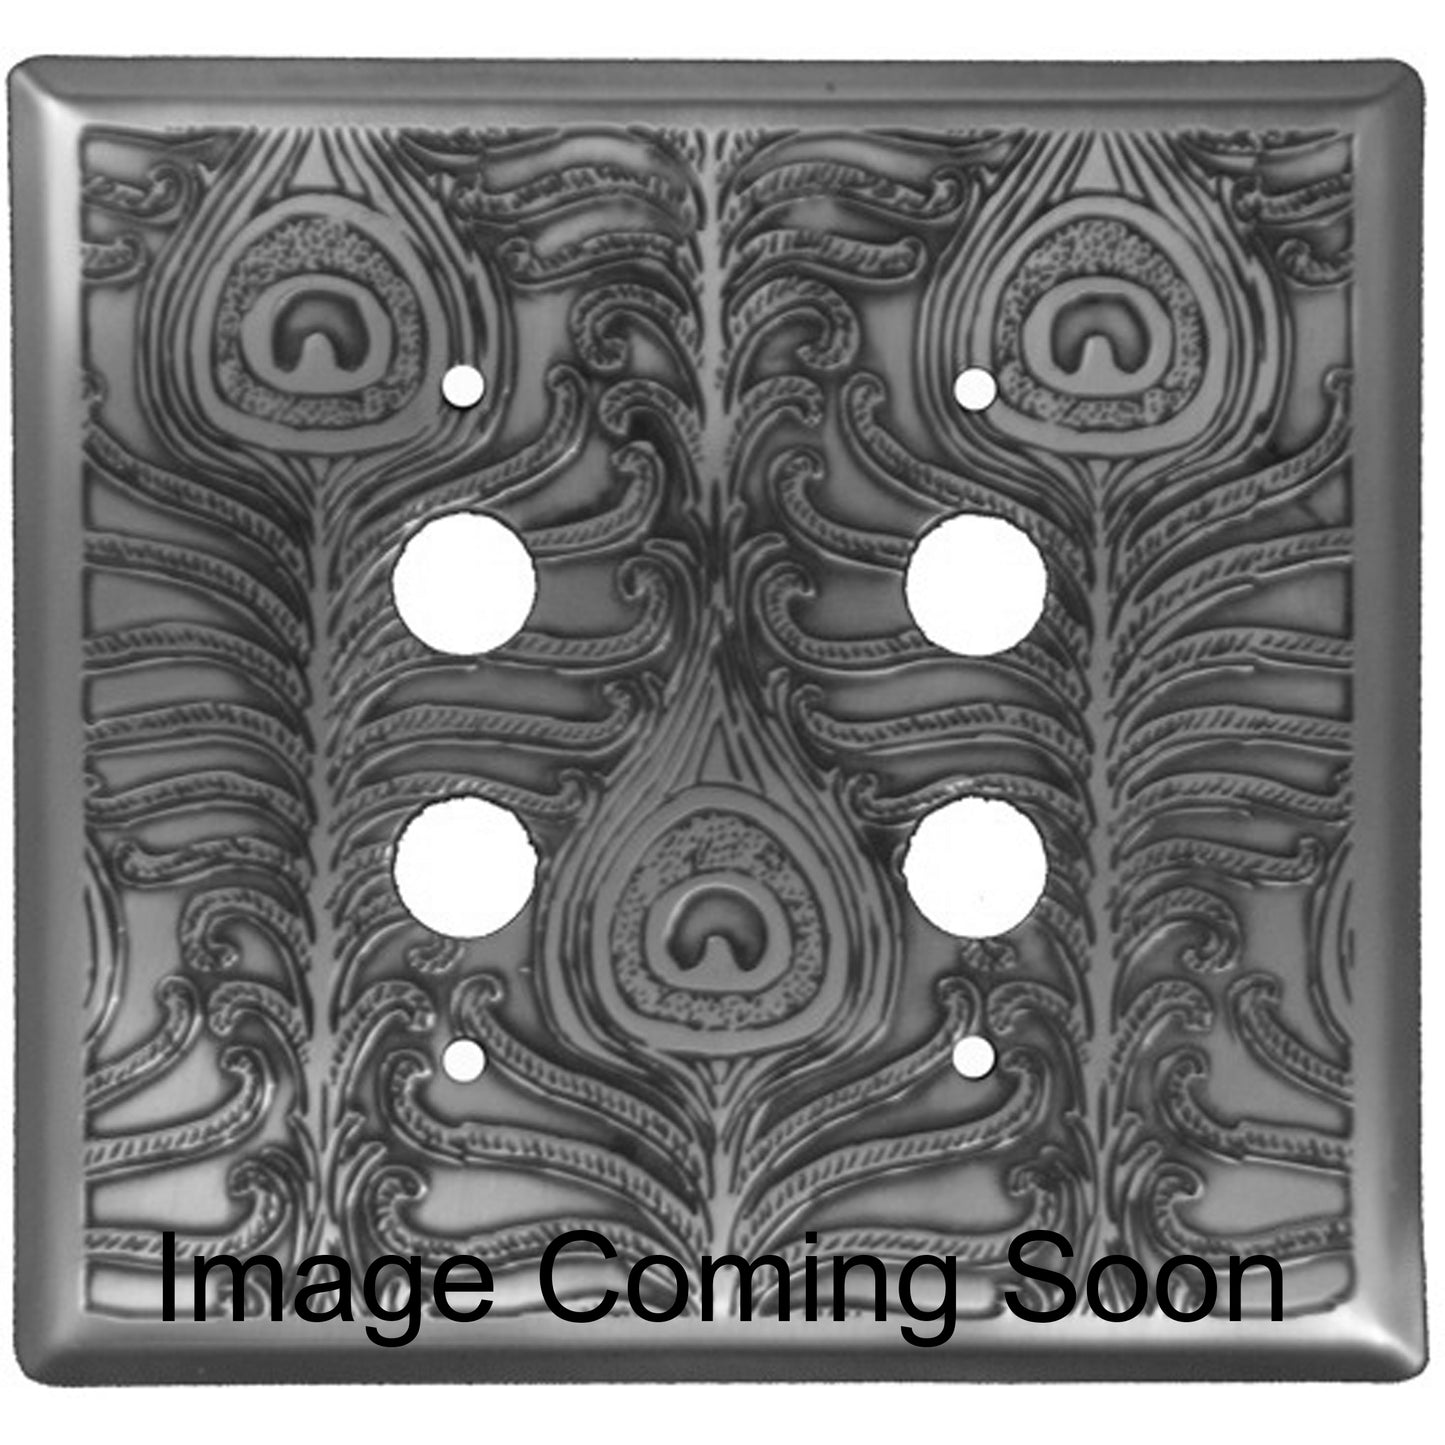 Peacock Stainless Steel 2 PushbuttonSwitchplate